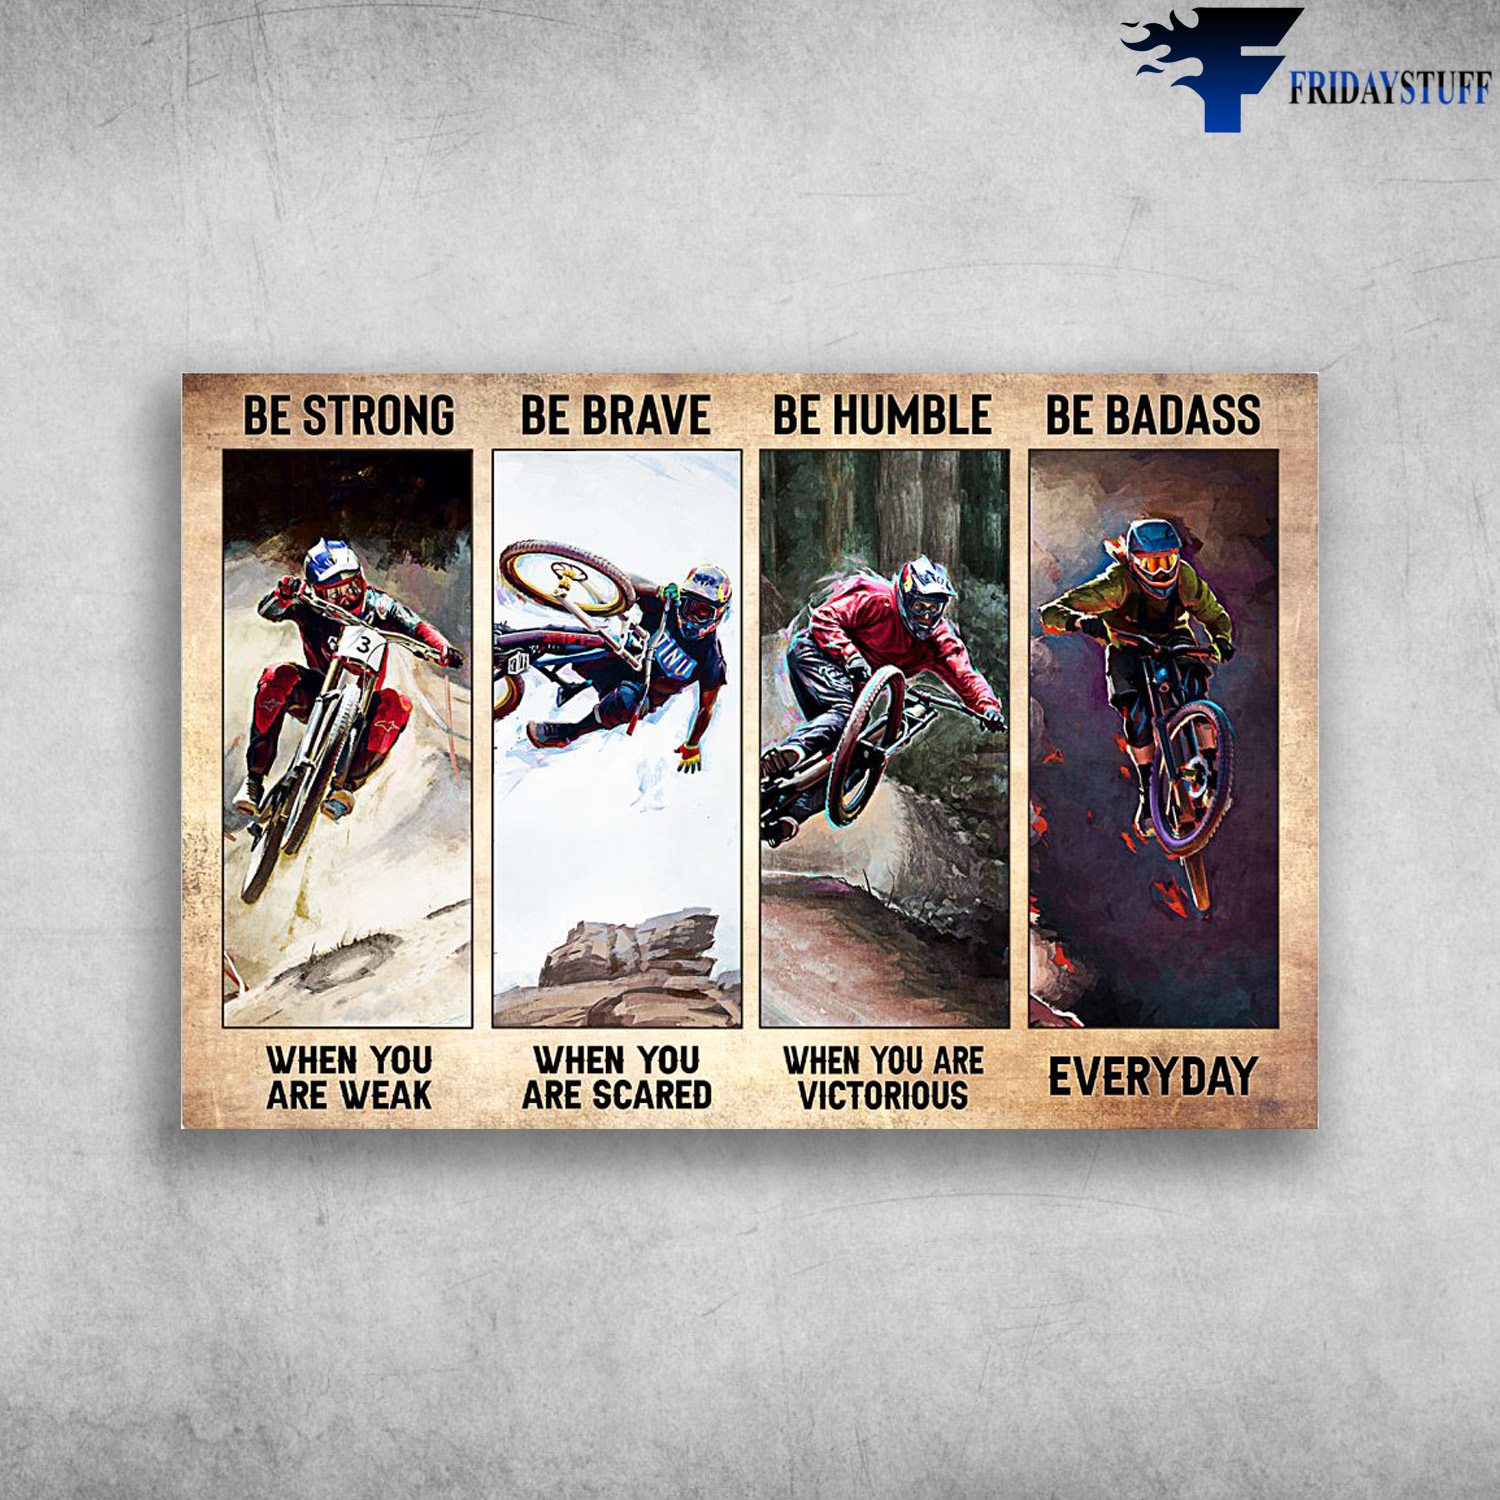 Motocross Man - Be Strong When You Are Weak, Be Brave When You Are Scared, Be Humbe When You Are Victrorious, Be Badass Everyday